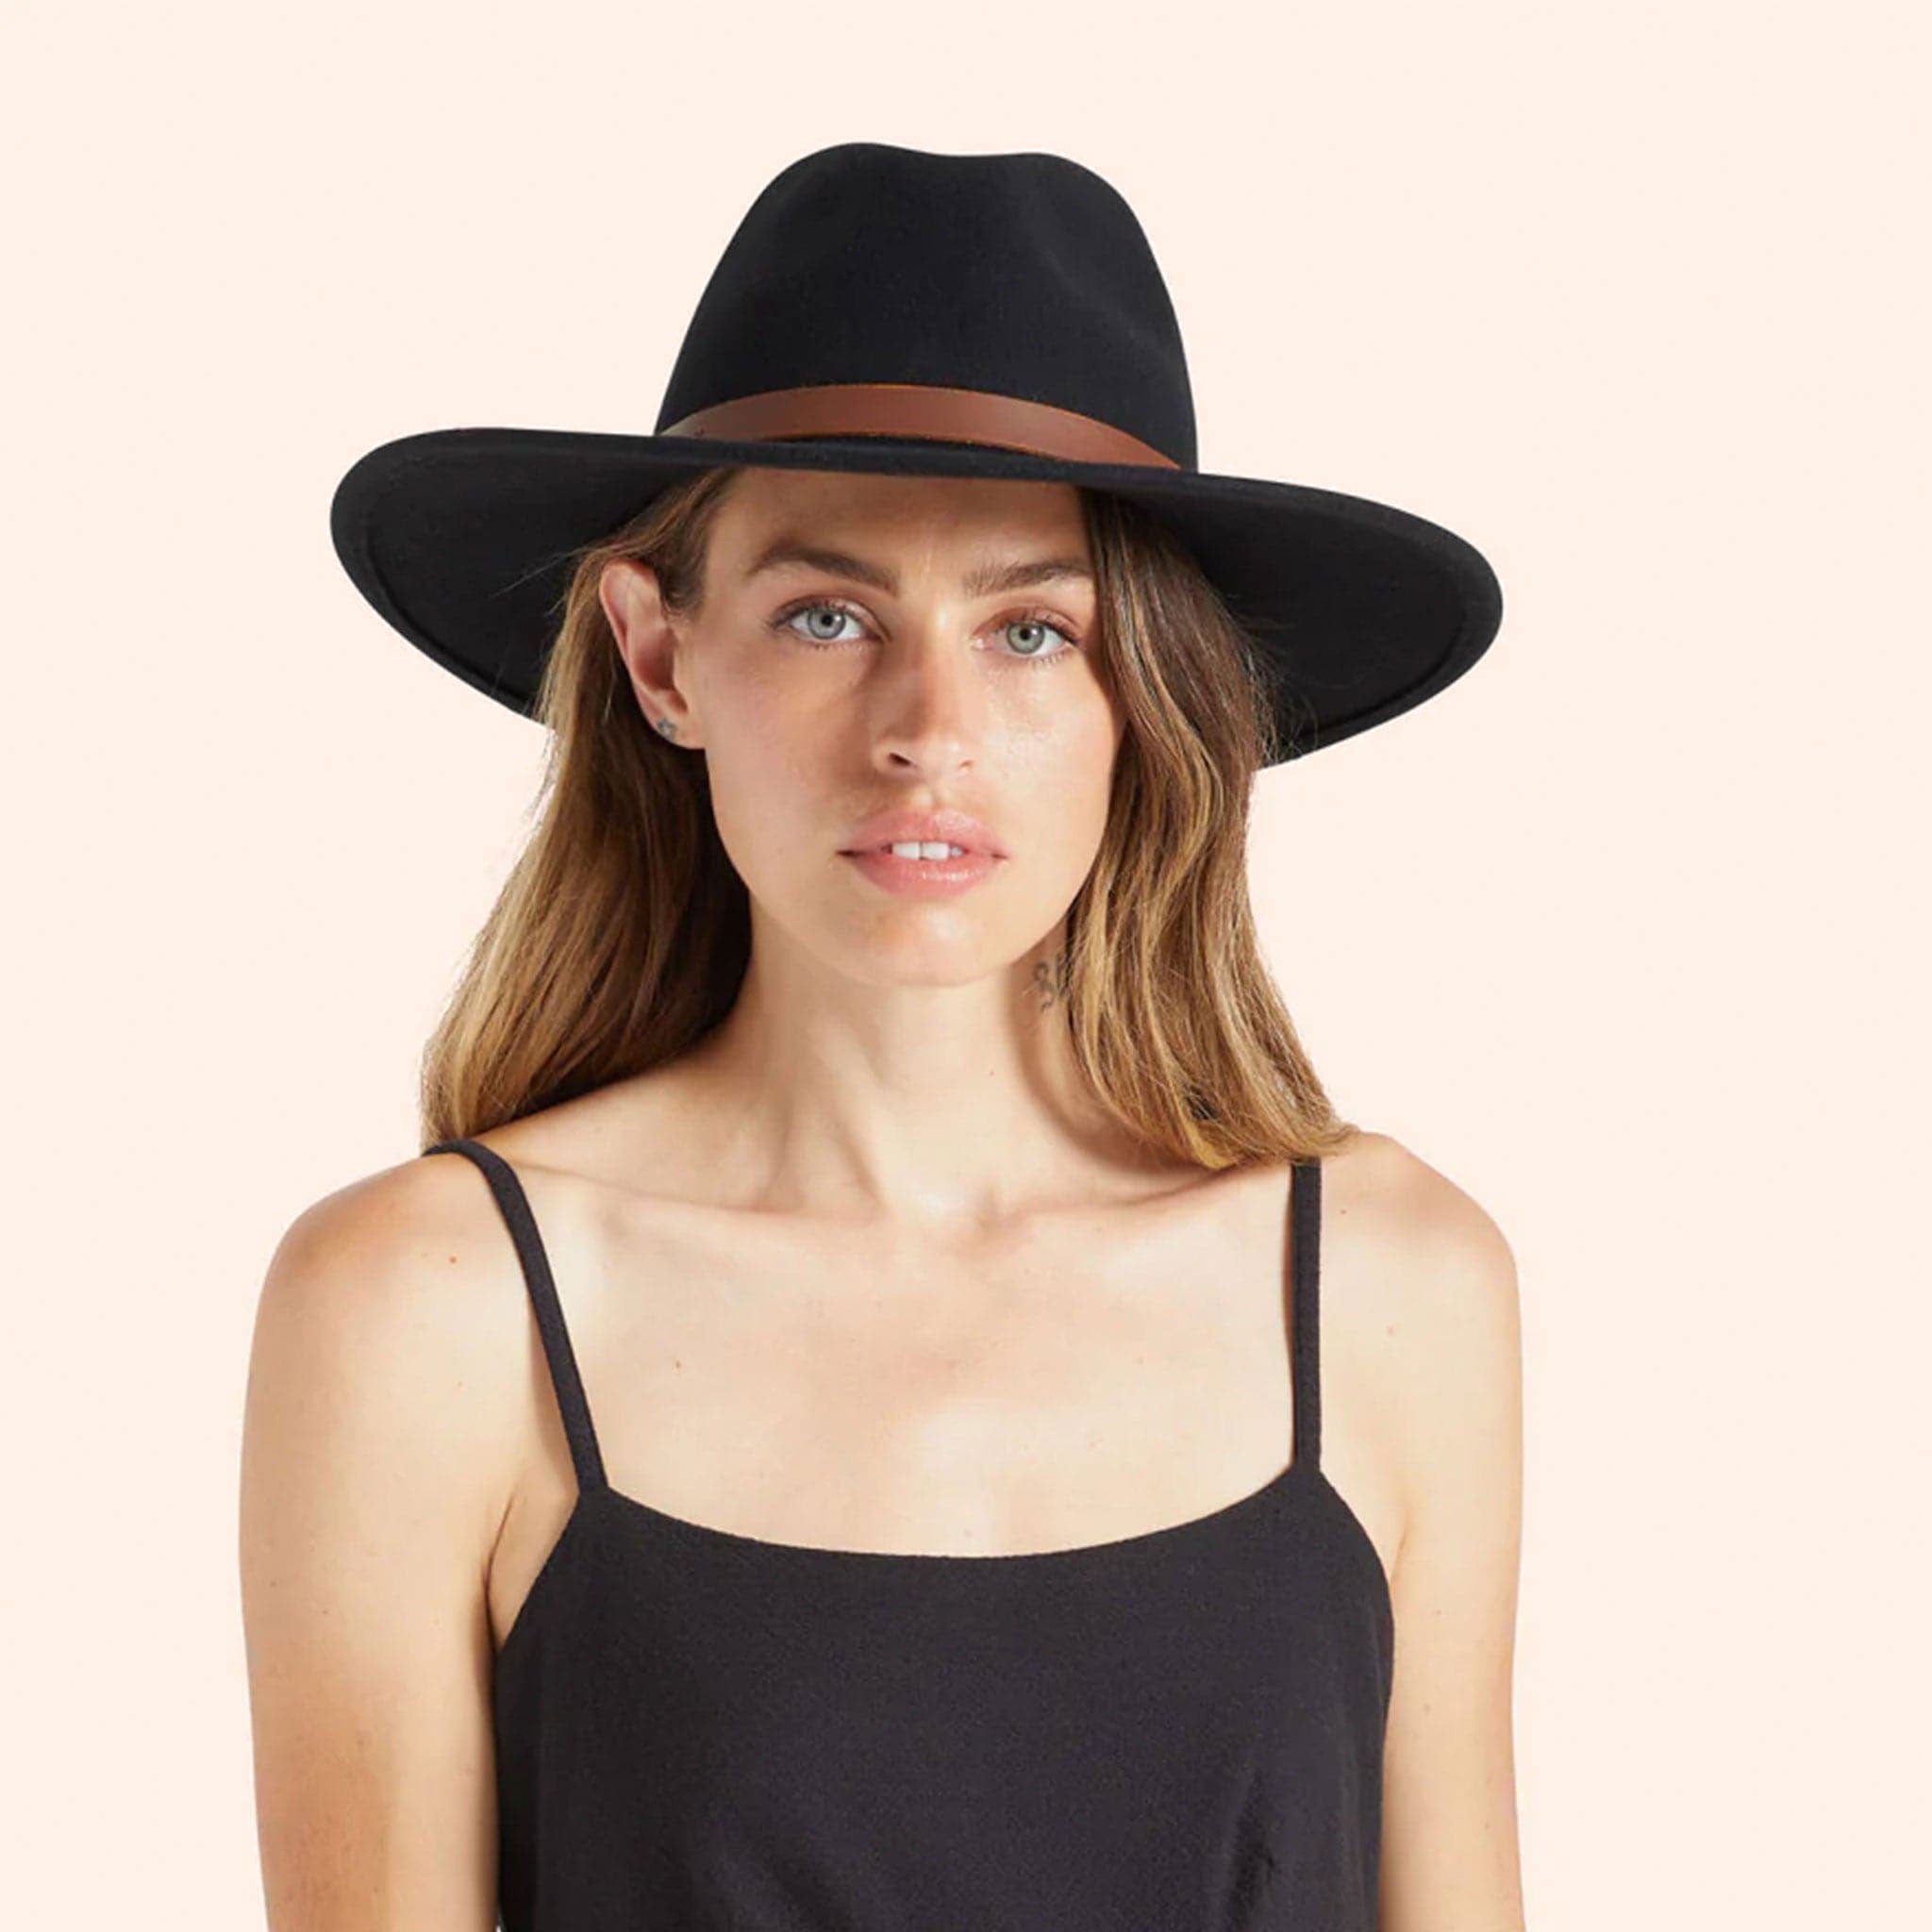 model wearing a black hat with a stiff brim and a brown leather strap around the base.